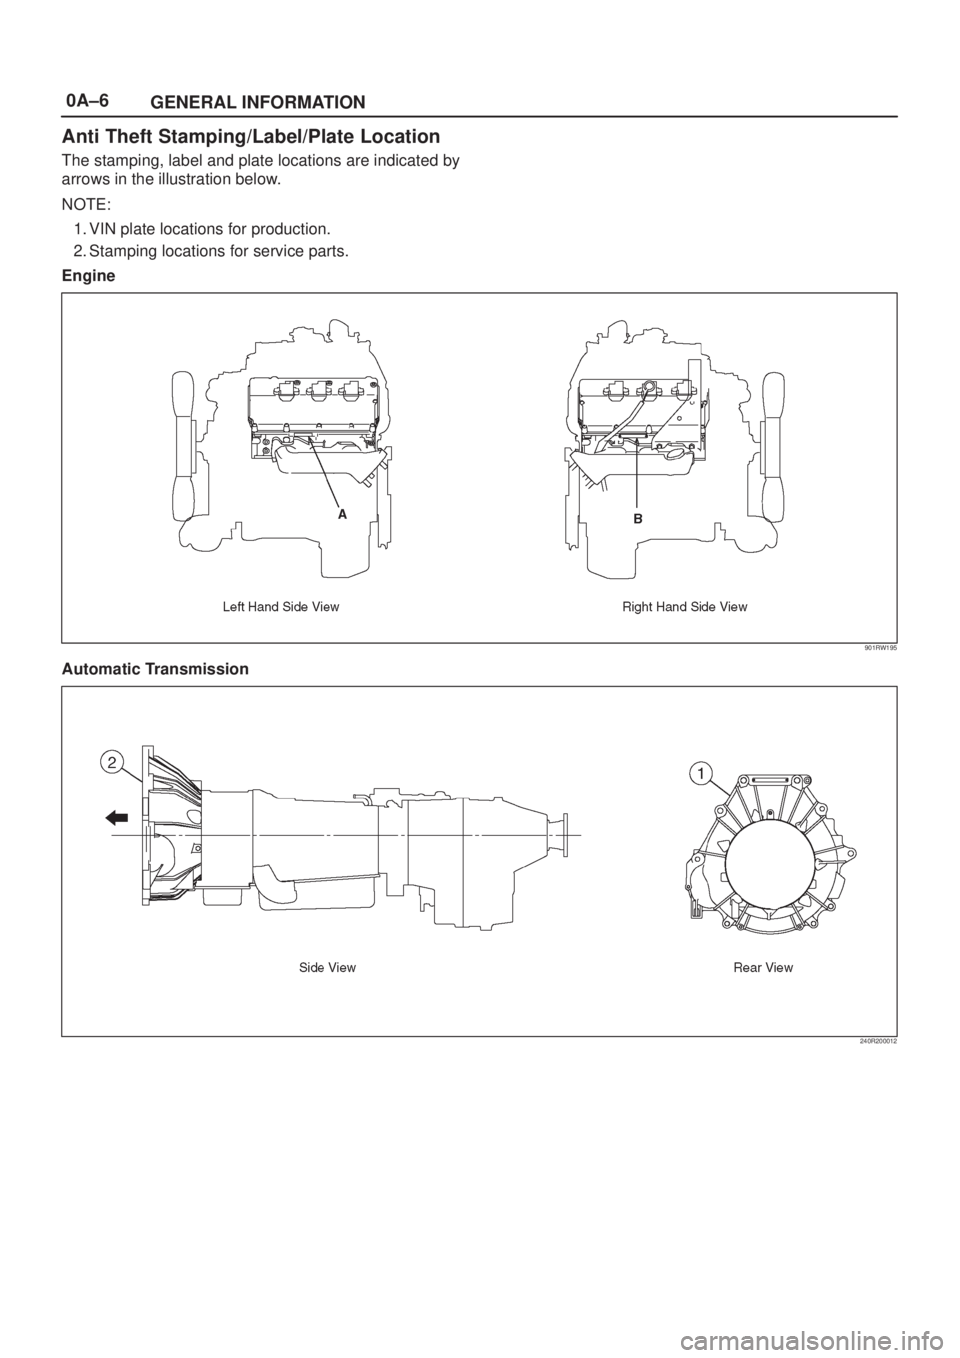 ISUZU AXIOM 2002  Service Repair Manual 0A±6
GENERAL INFORMATION
Anti Theft Stamping/Label/Plate Location
The stamping, label and plate locations are indicated by
arrows in the illustration below.
NOTE:
1. VIN plate locations for productio